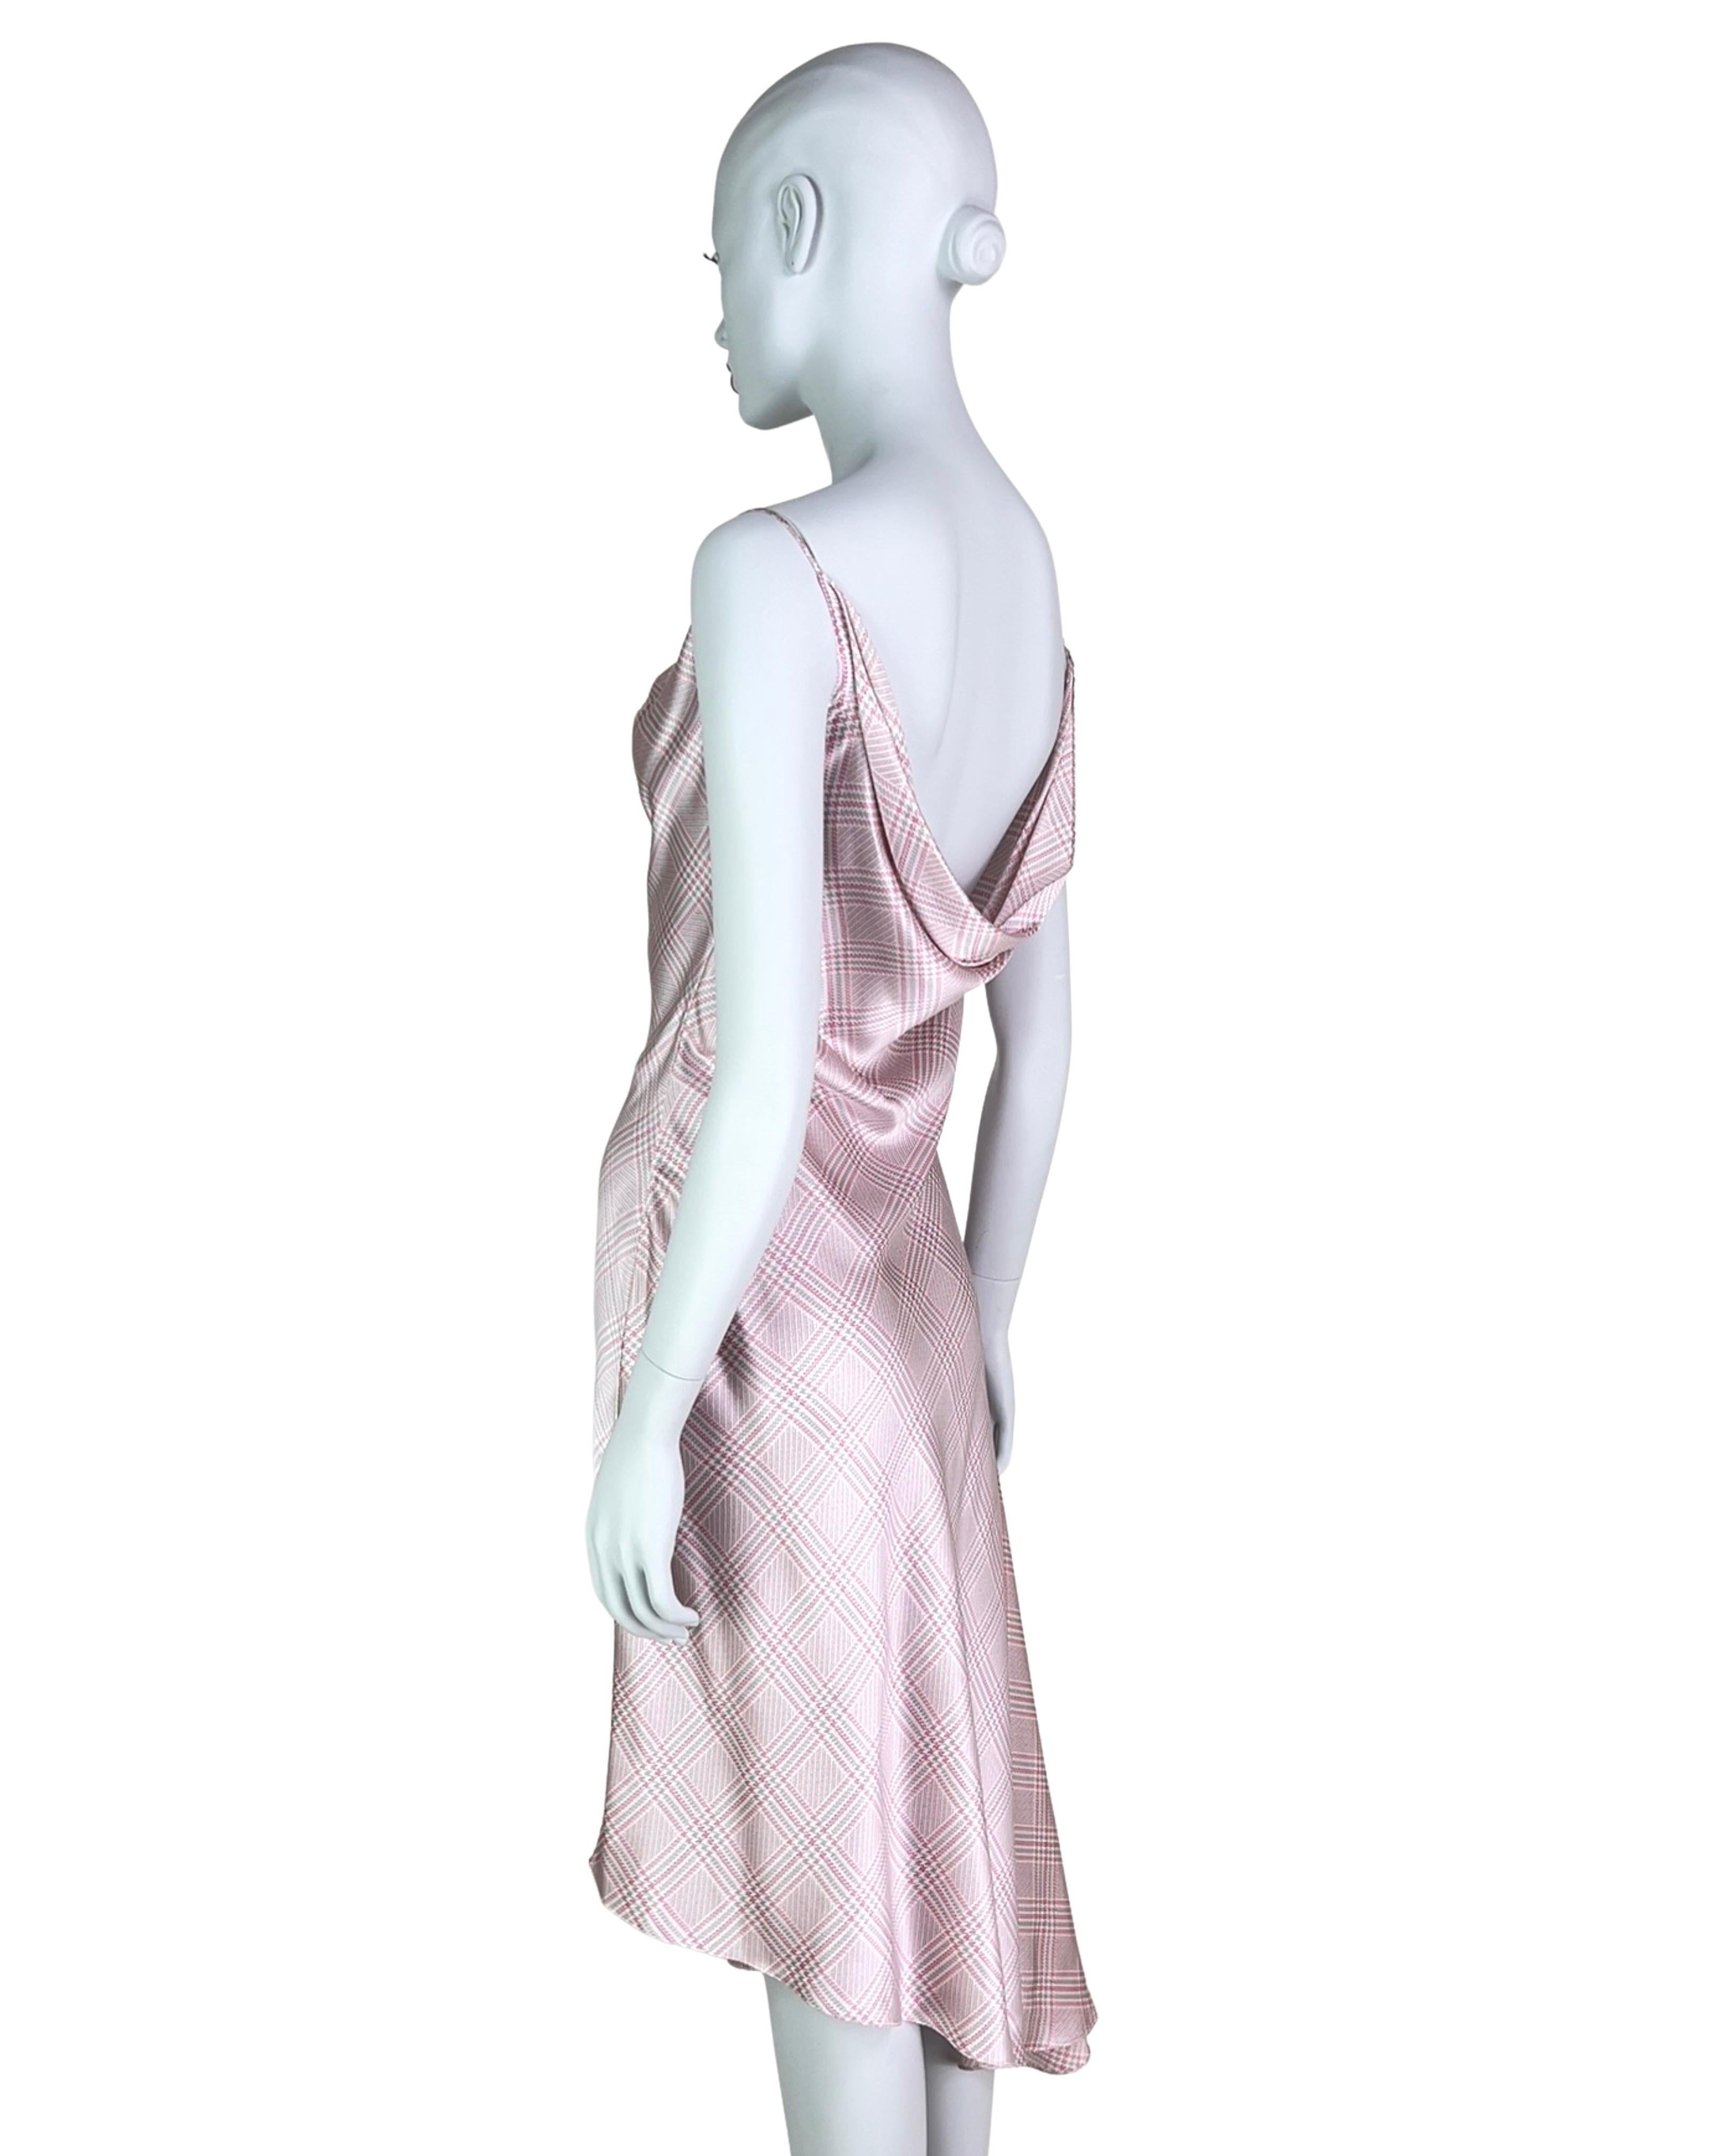 Givenchy by Alexander McQueen Spring 1998 Silk Dress For Sale 1